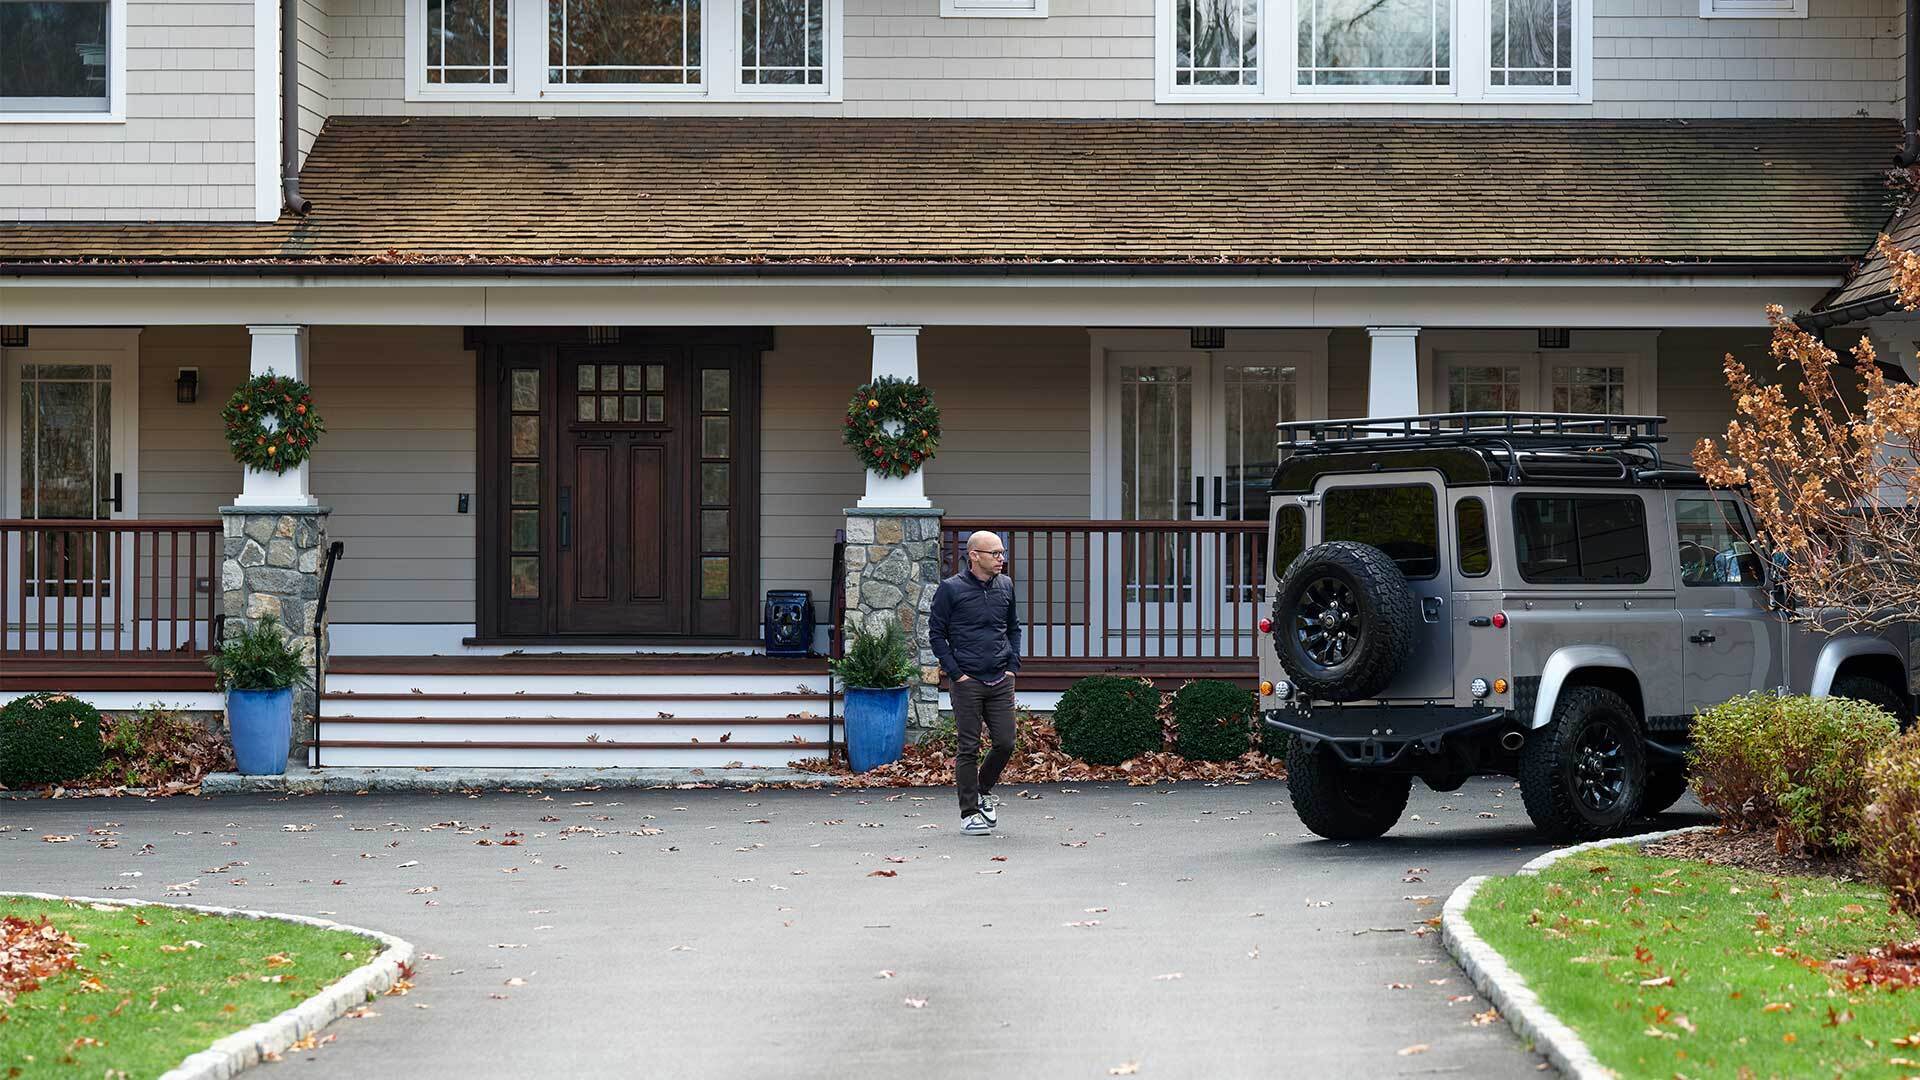 A man in front of a large house, walking toward an SUV.